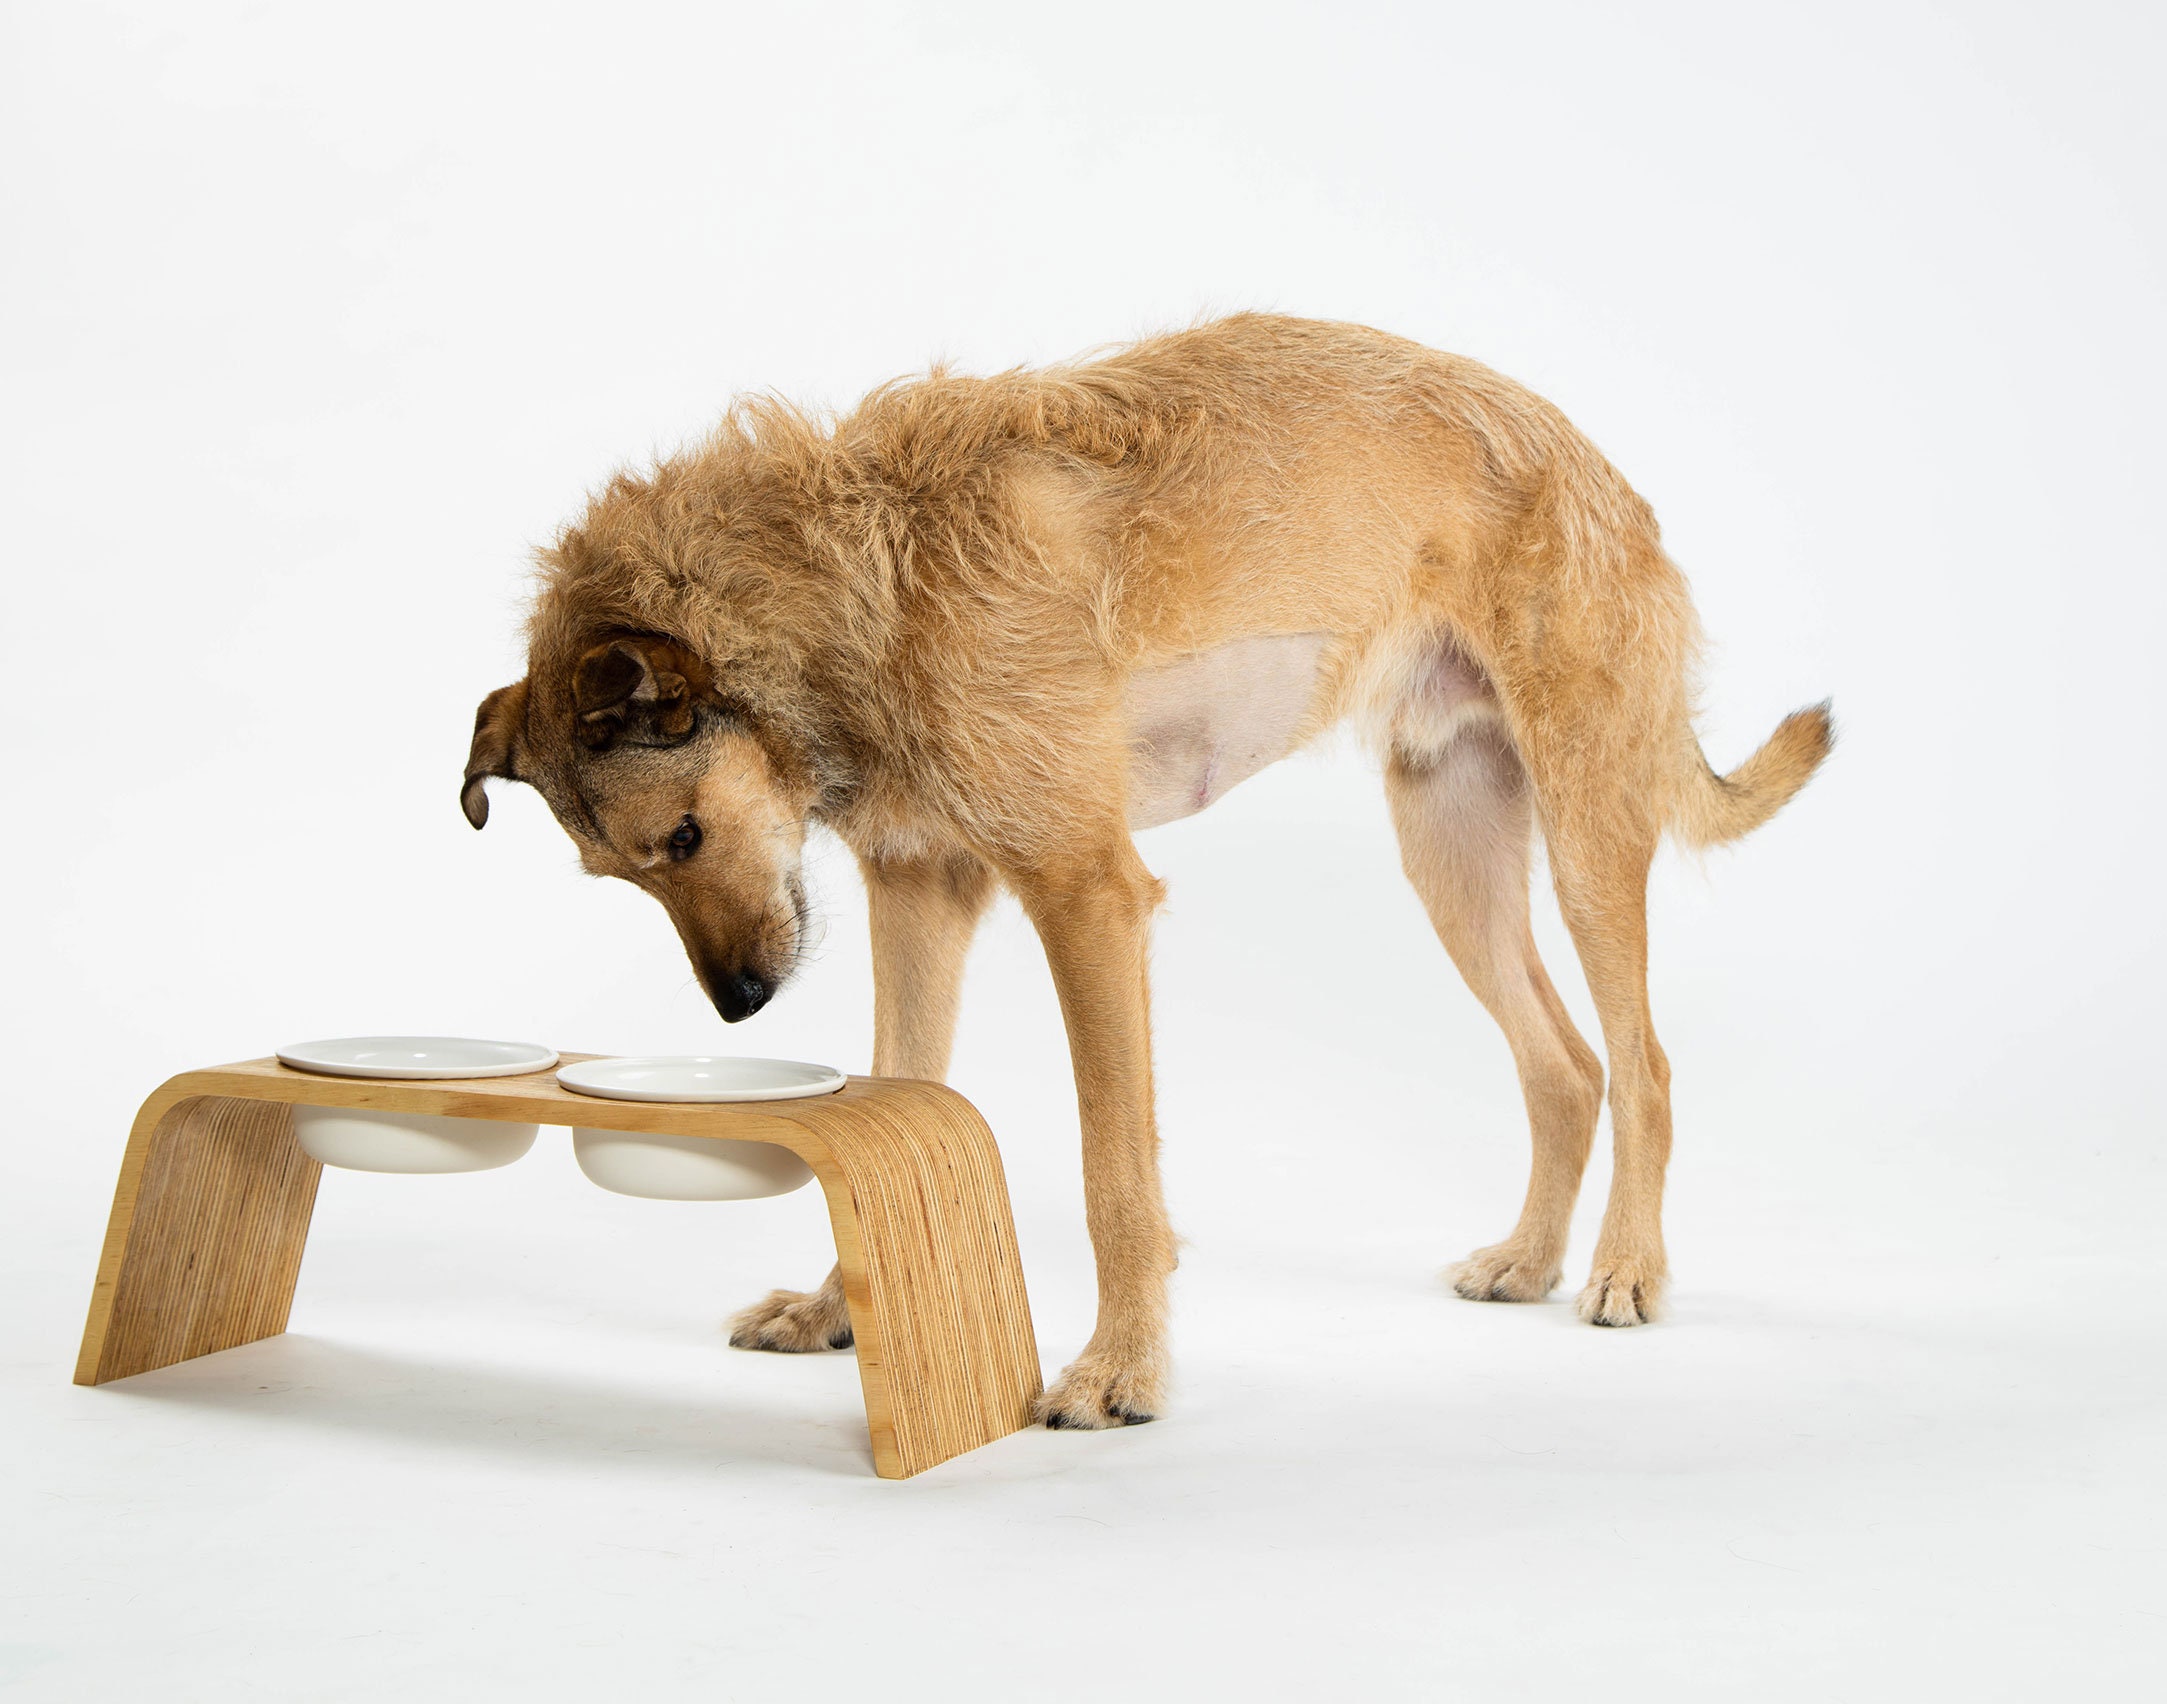 Floppy Dawg Elevated Wooden Dog Bowl Stand with 2 Ceramic Bowls